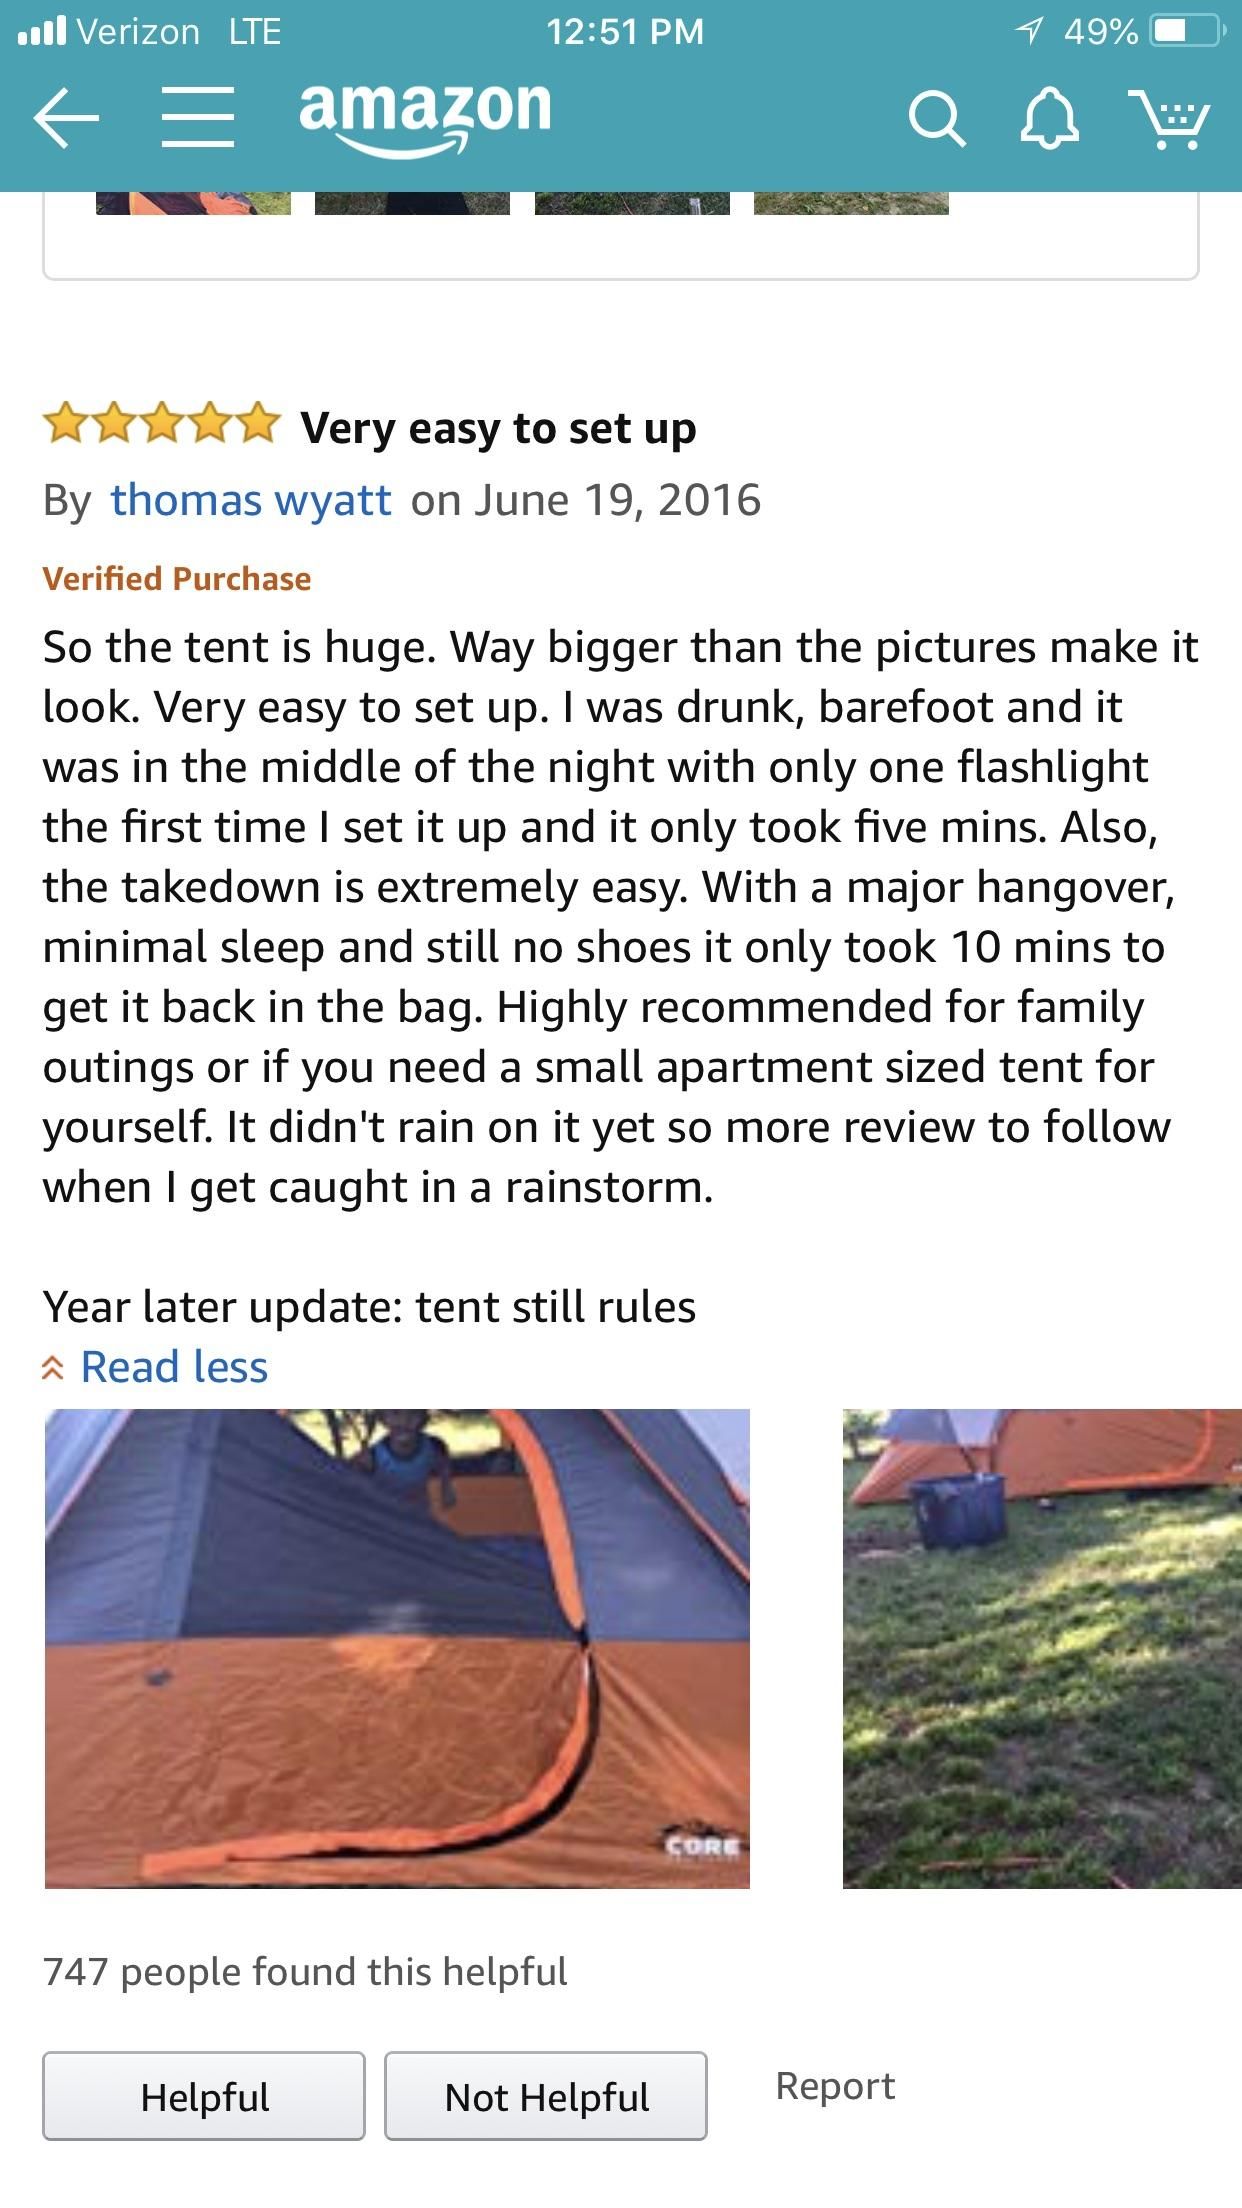 So I was shopping around for tents when I came across this review...